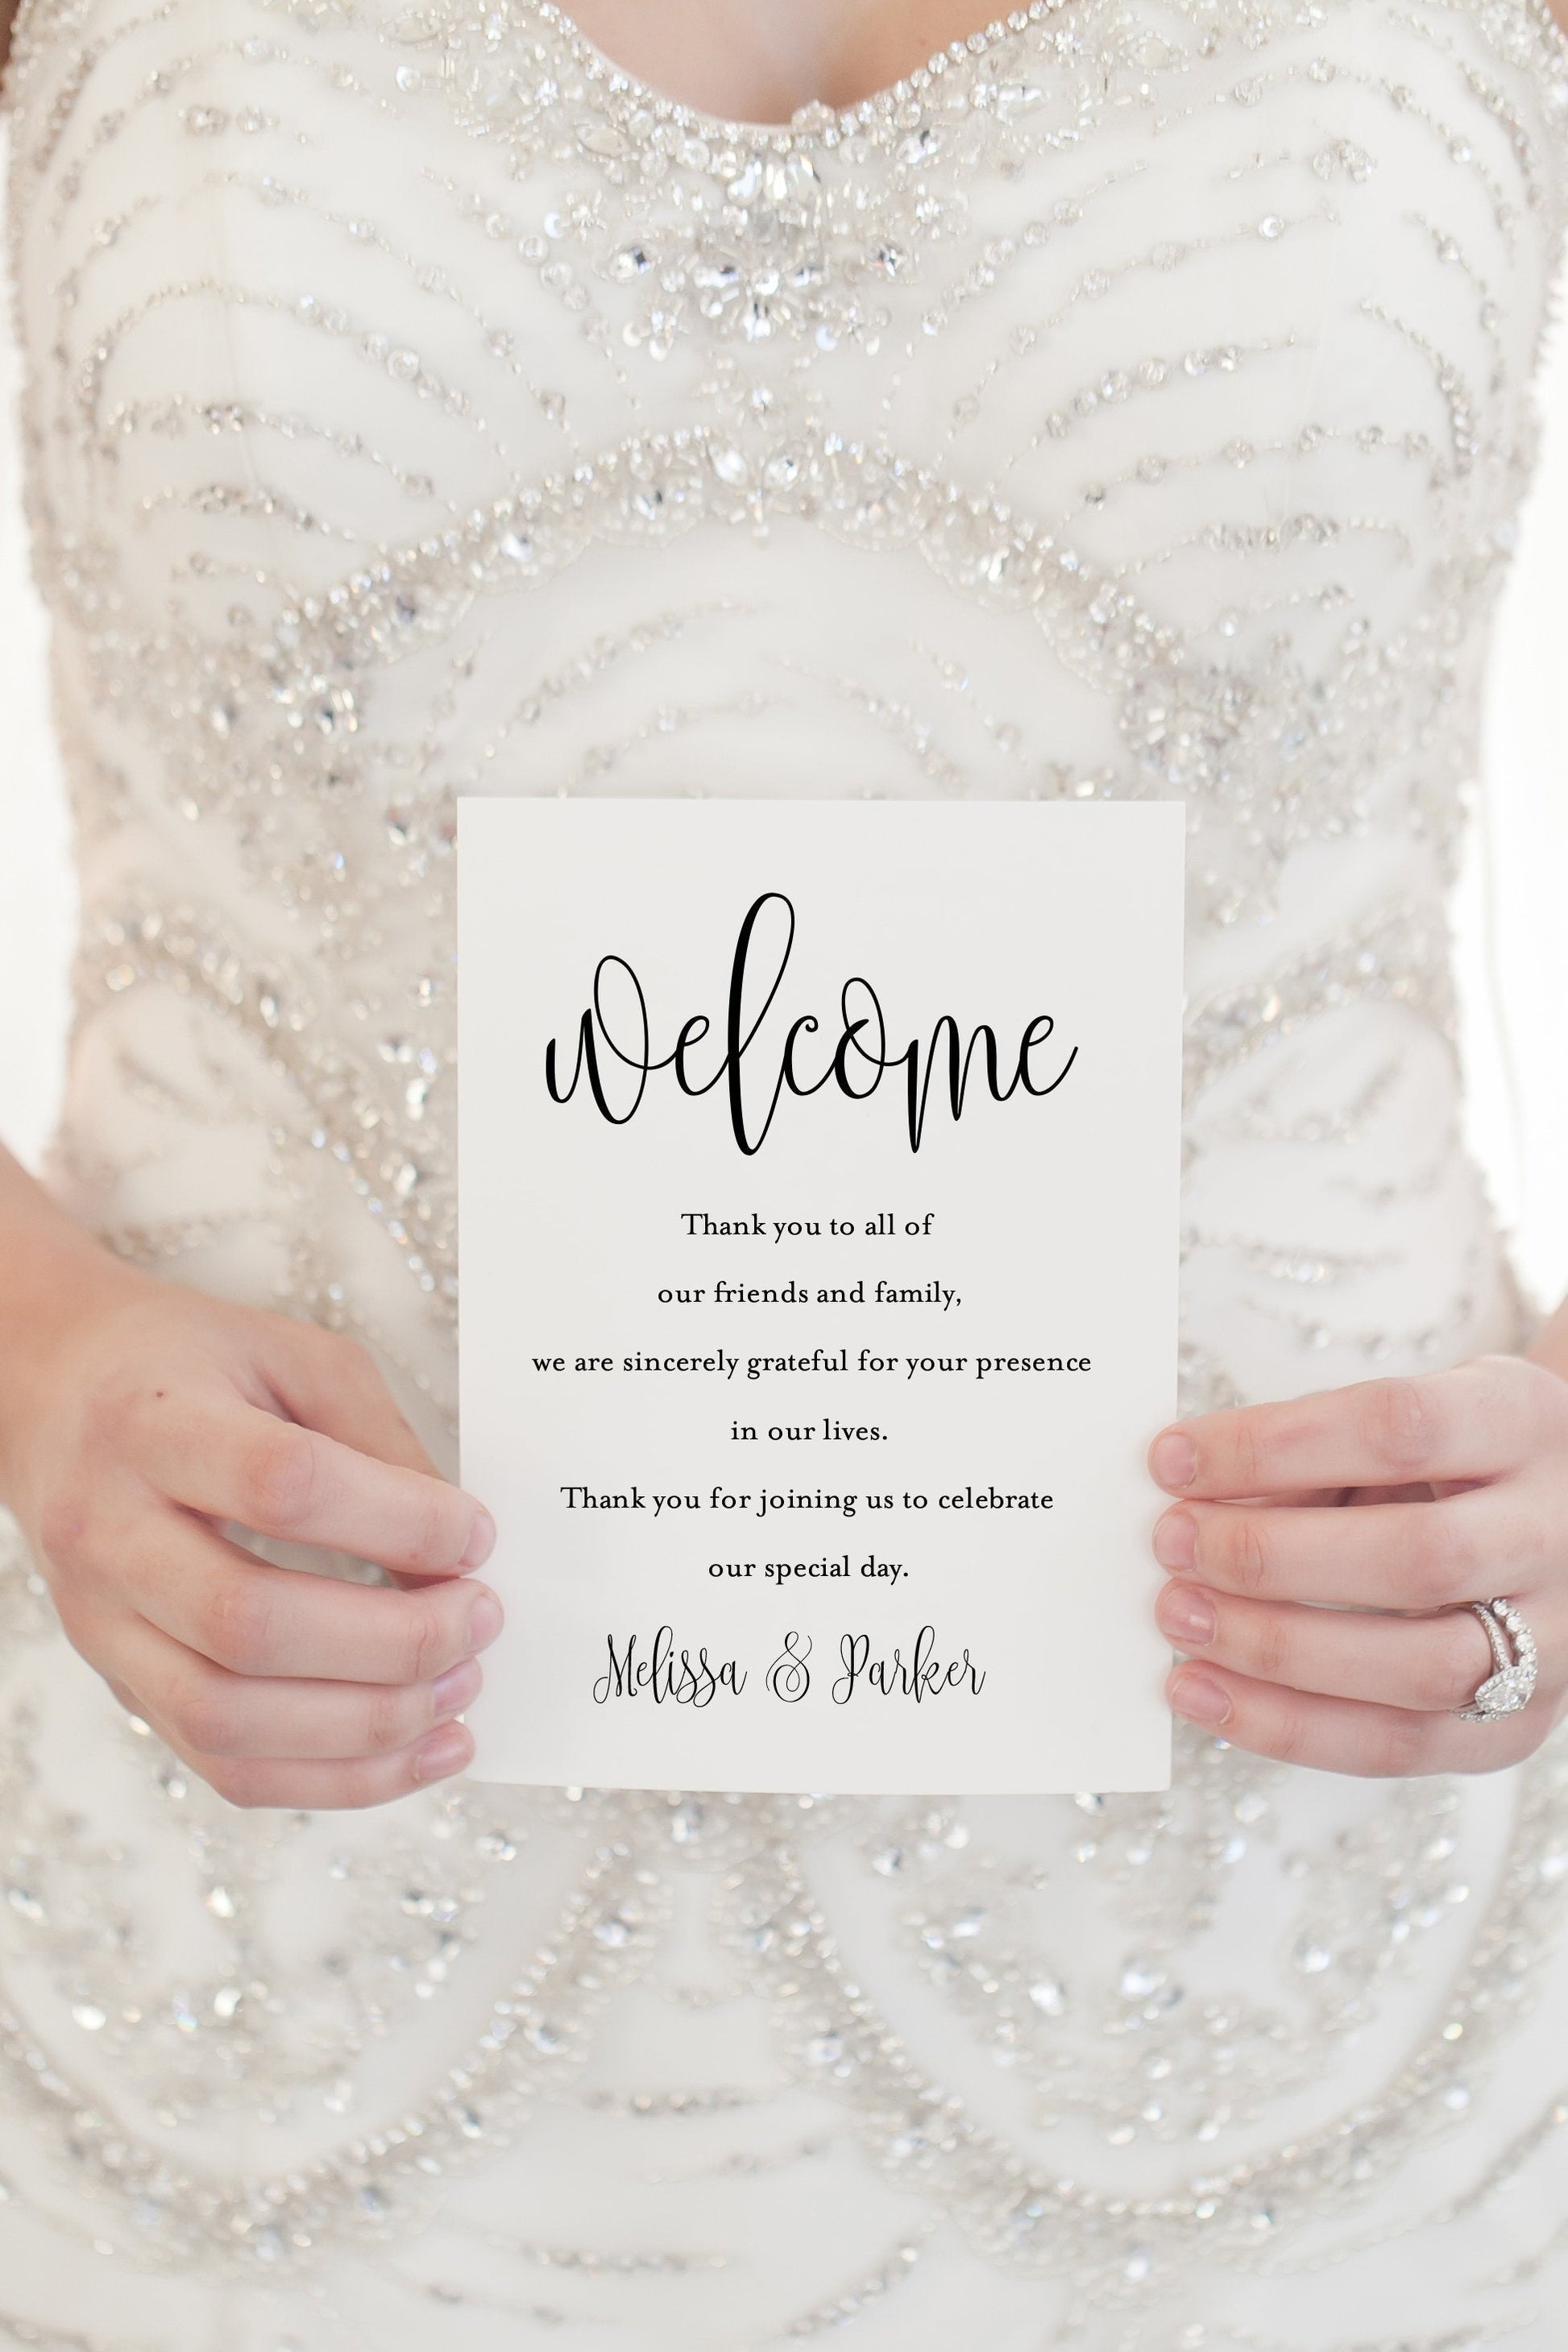 Printable Wedding Itinerary Template Card Timeline Greenery Welcome 100% editable Templett - Melissa MENU|PROGRAMS|TIMELINE SAVVY PAPER CO